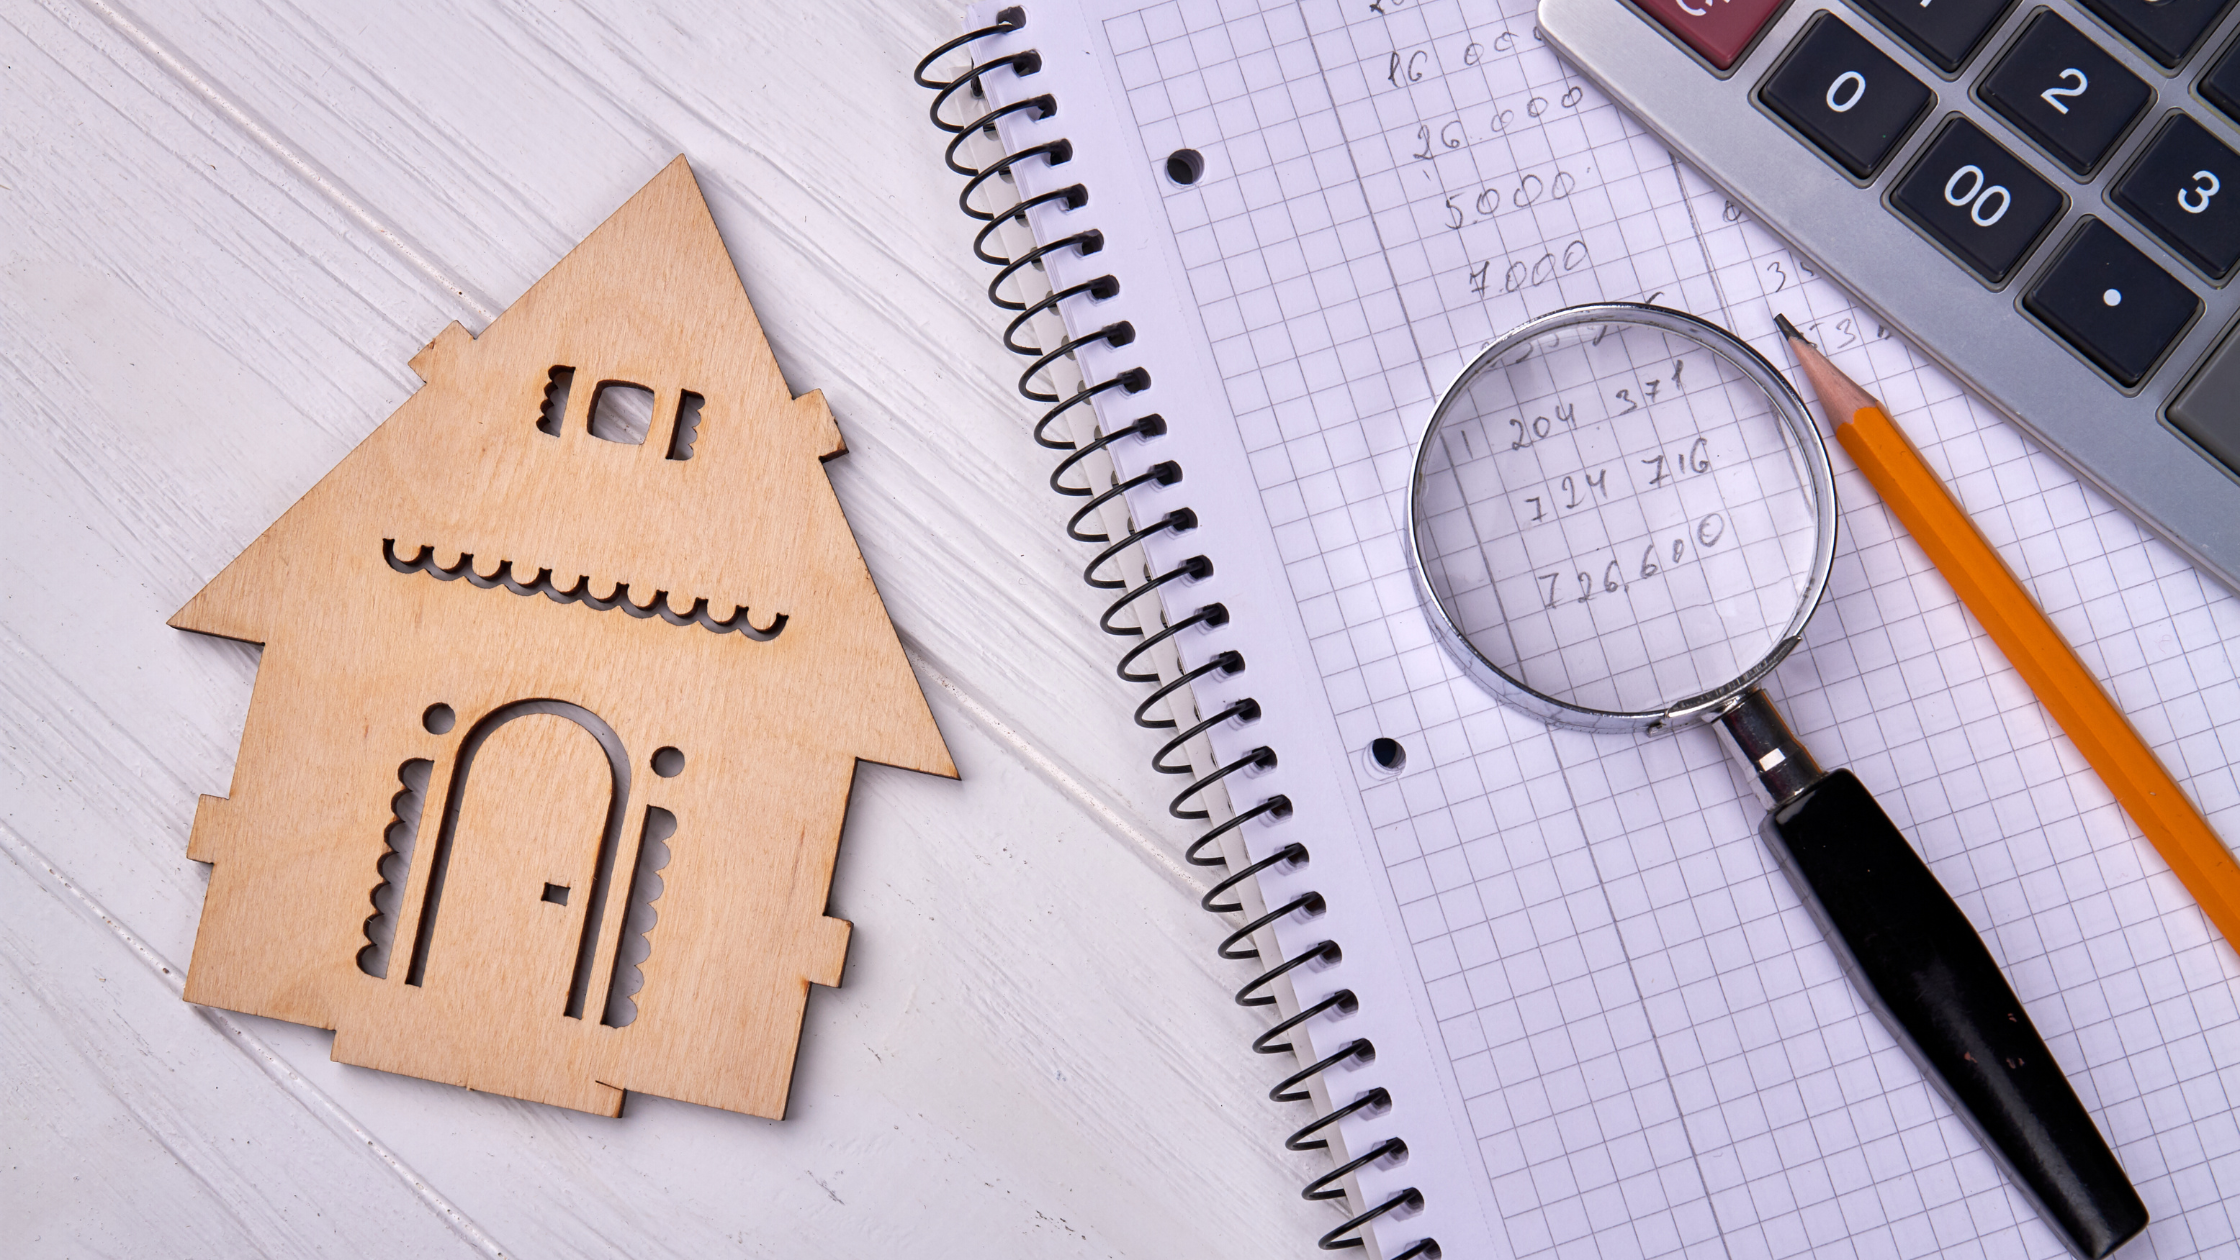 Understand the intricacies of home inspection and appraisal, and how they fit into your journey as a physician homebuyer.